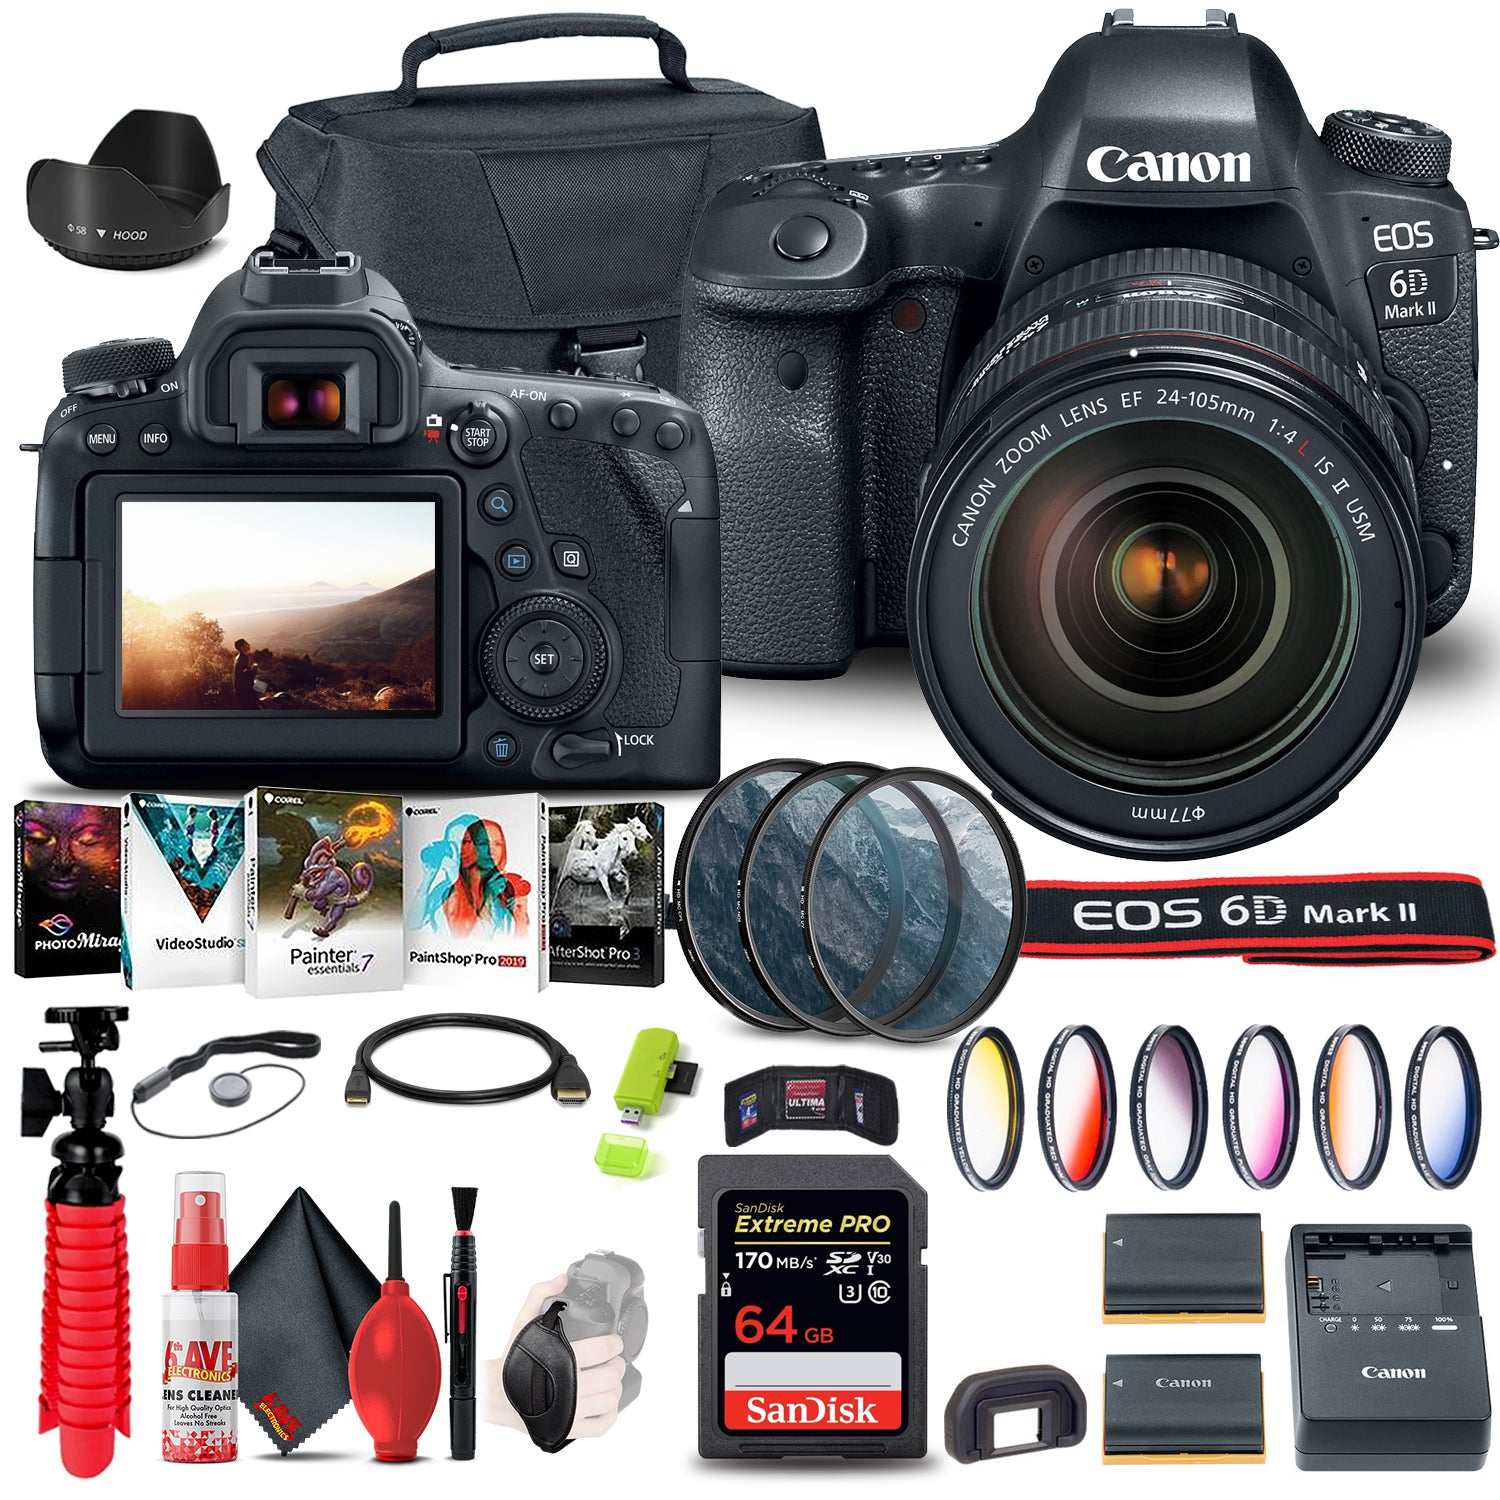 Canon EOS 6D Mark II Camera with 24-105mm f/4L II Lens (1897C009) Travel Vlogger Bundle